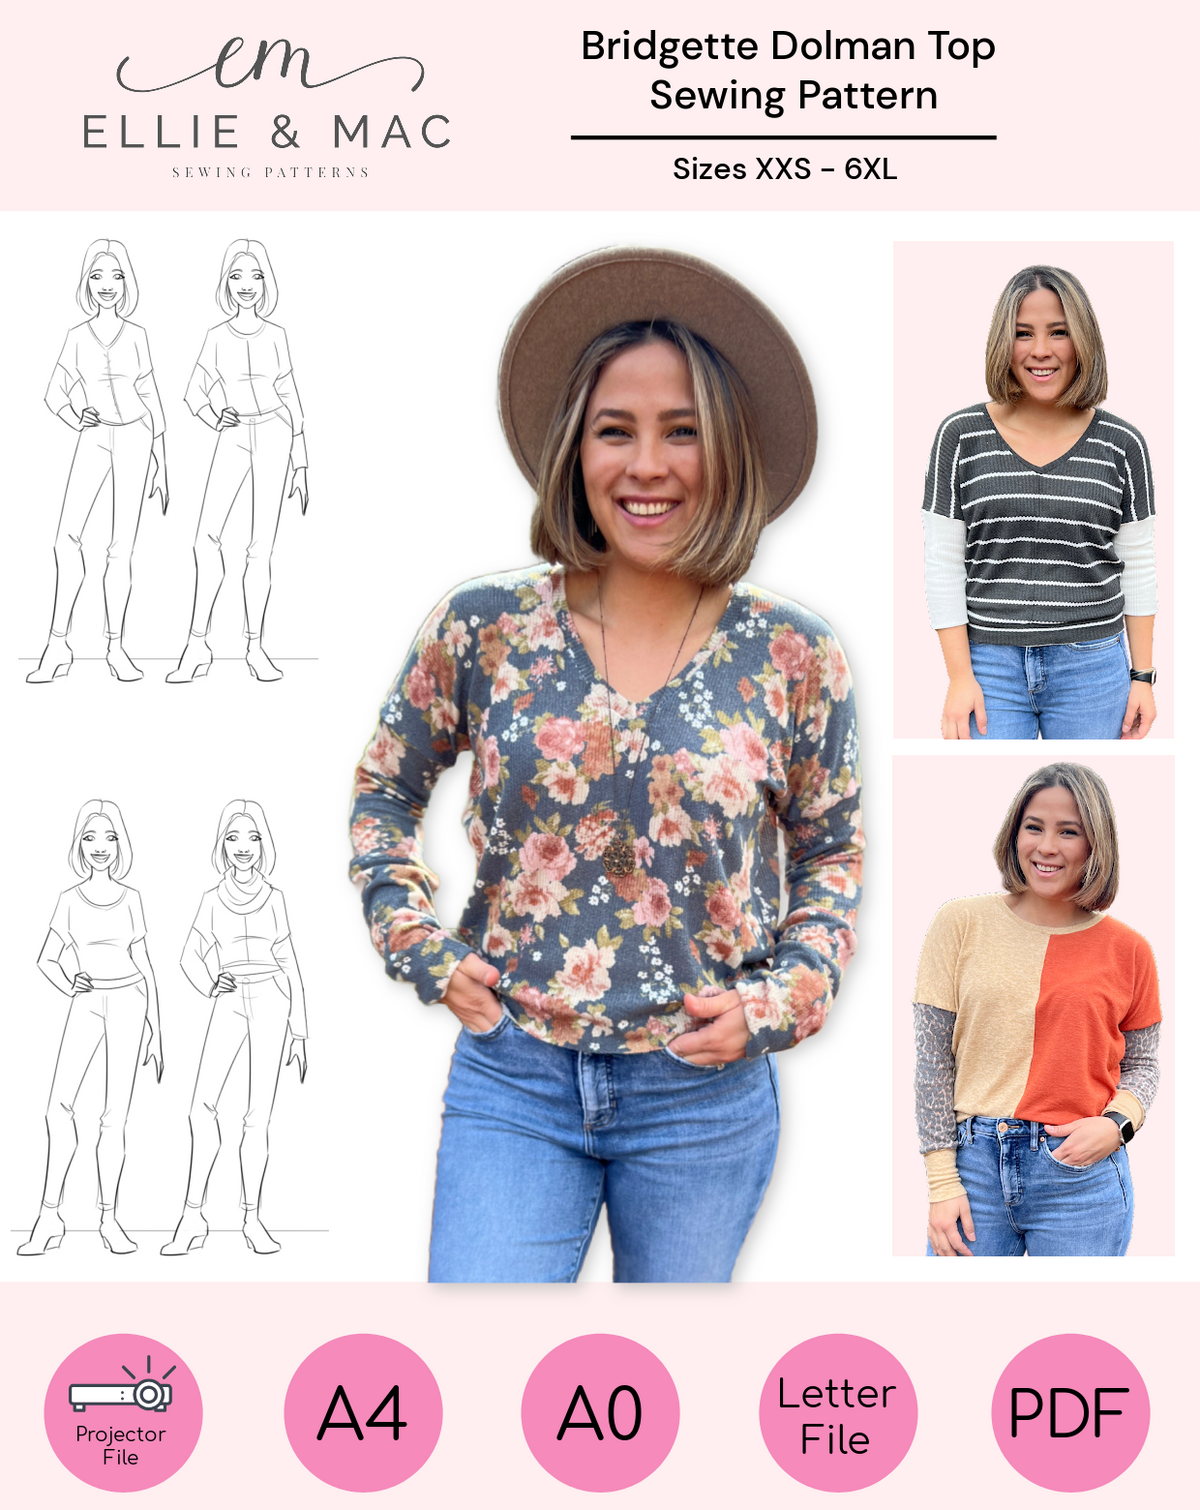 Sewing Patterns & Embroidery Designs by Ellie and Mac